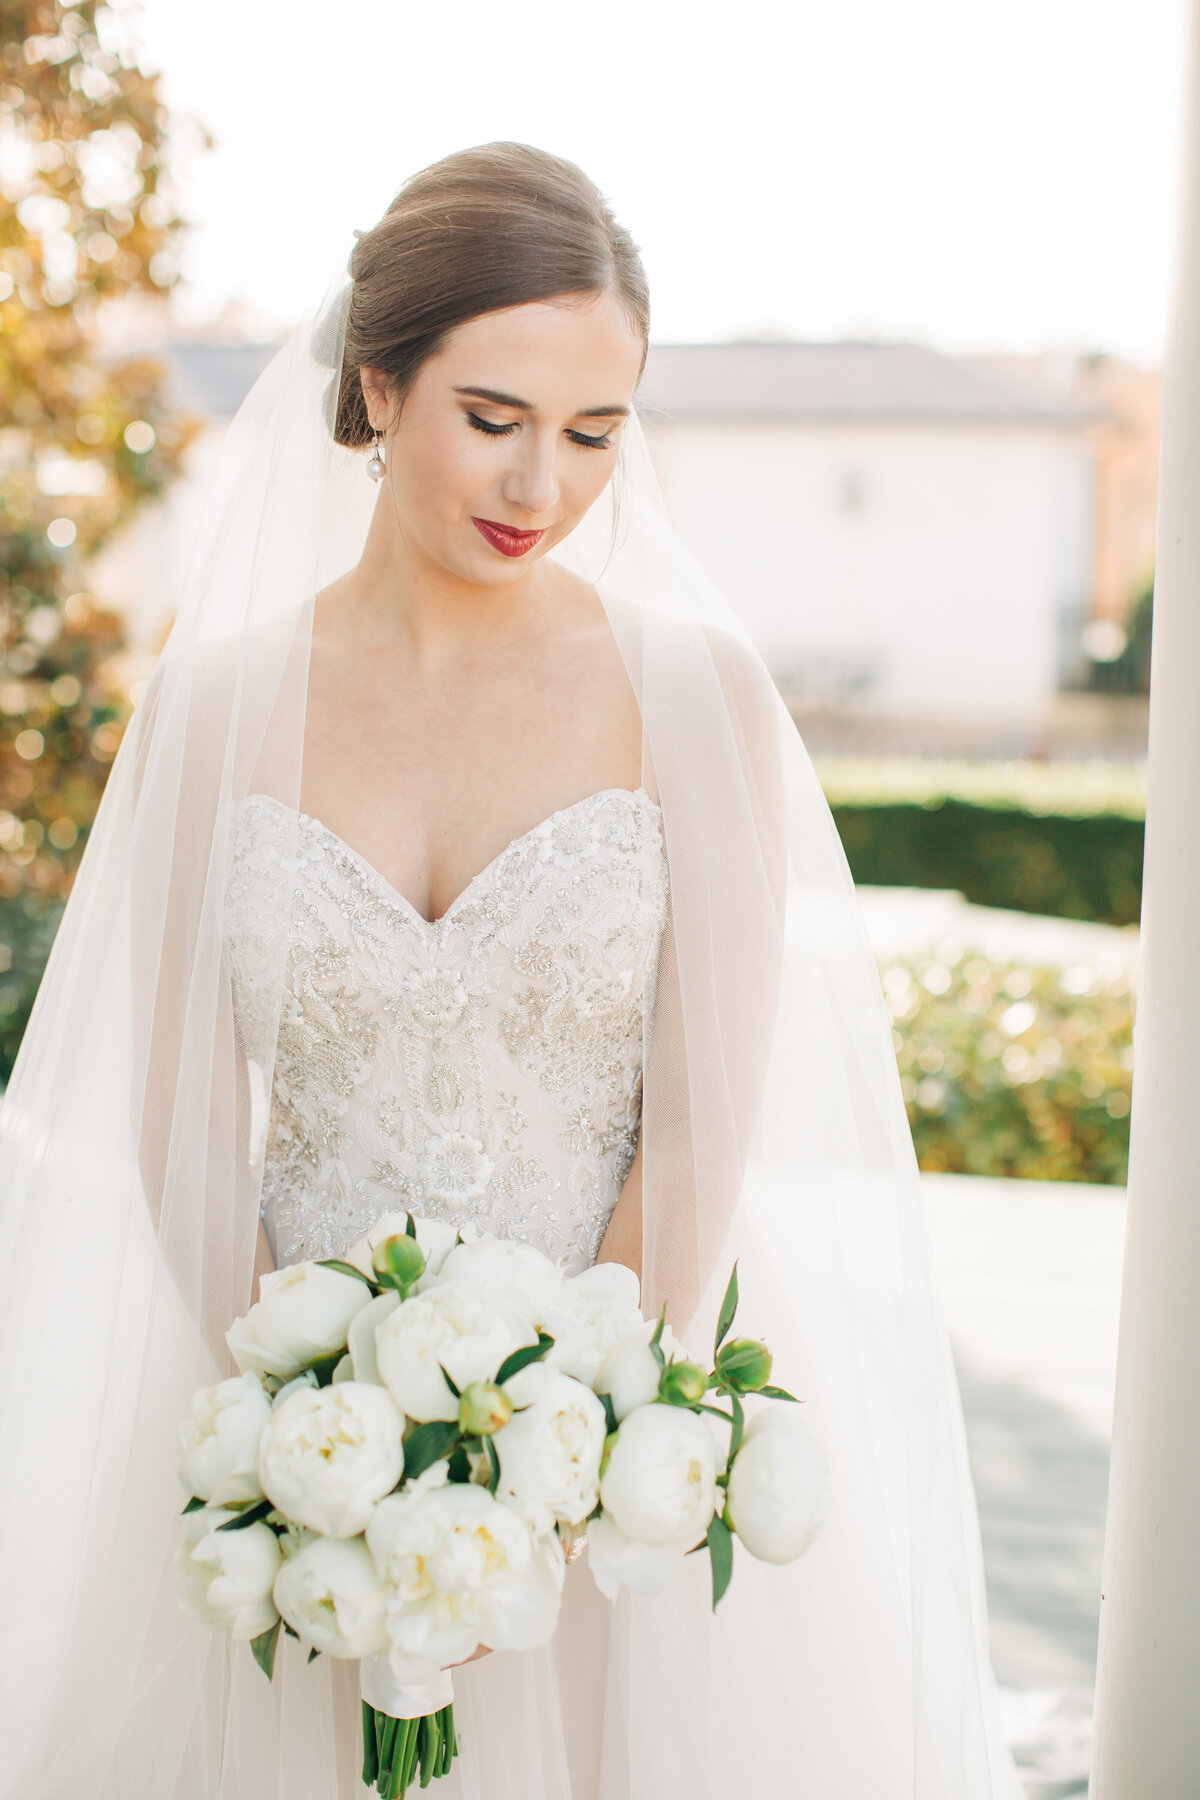 Wedding portrait of a bride in a sequined dress holding a bouquet of white peonies